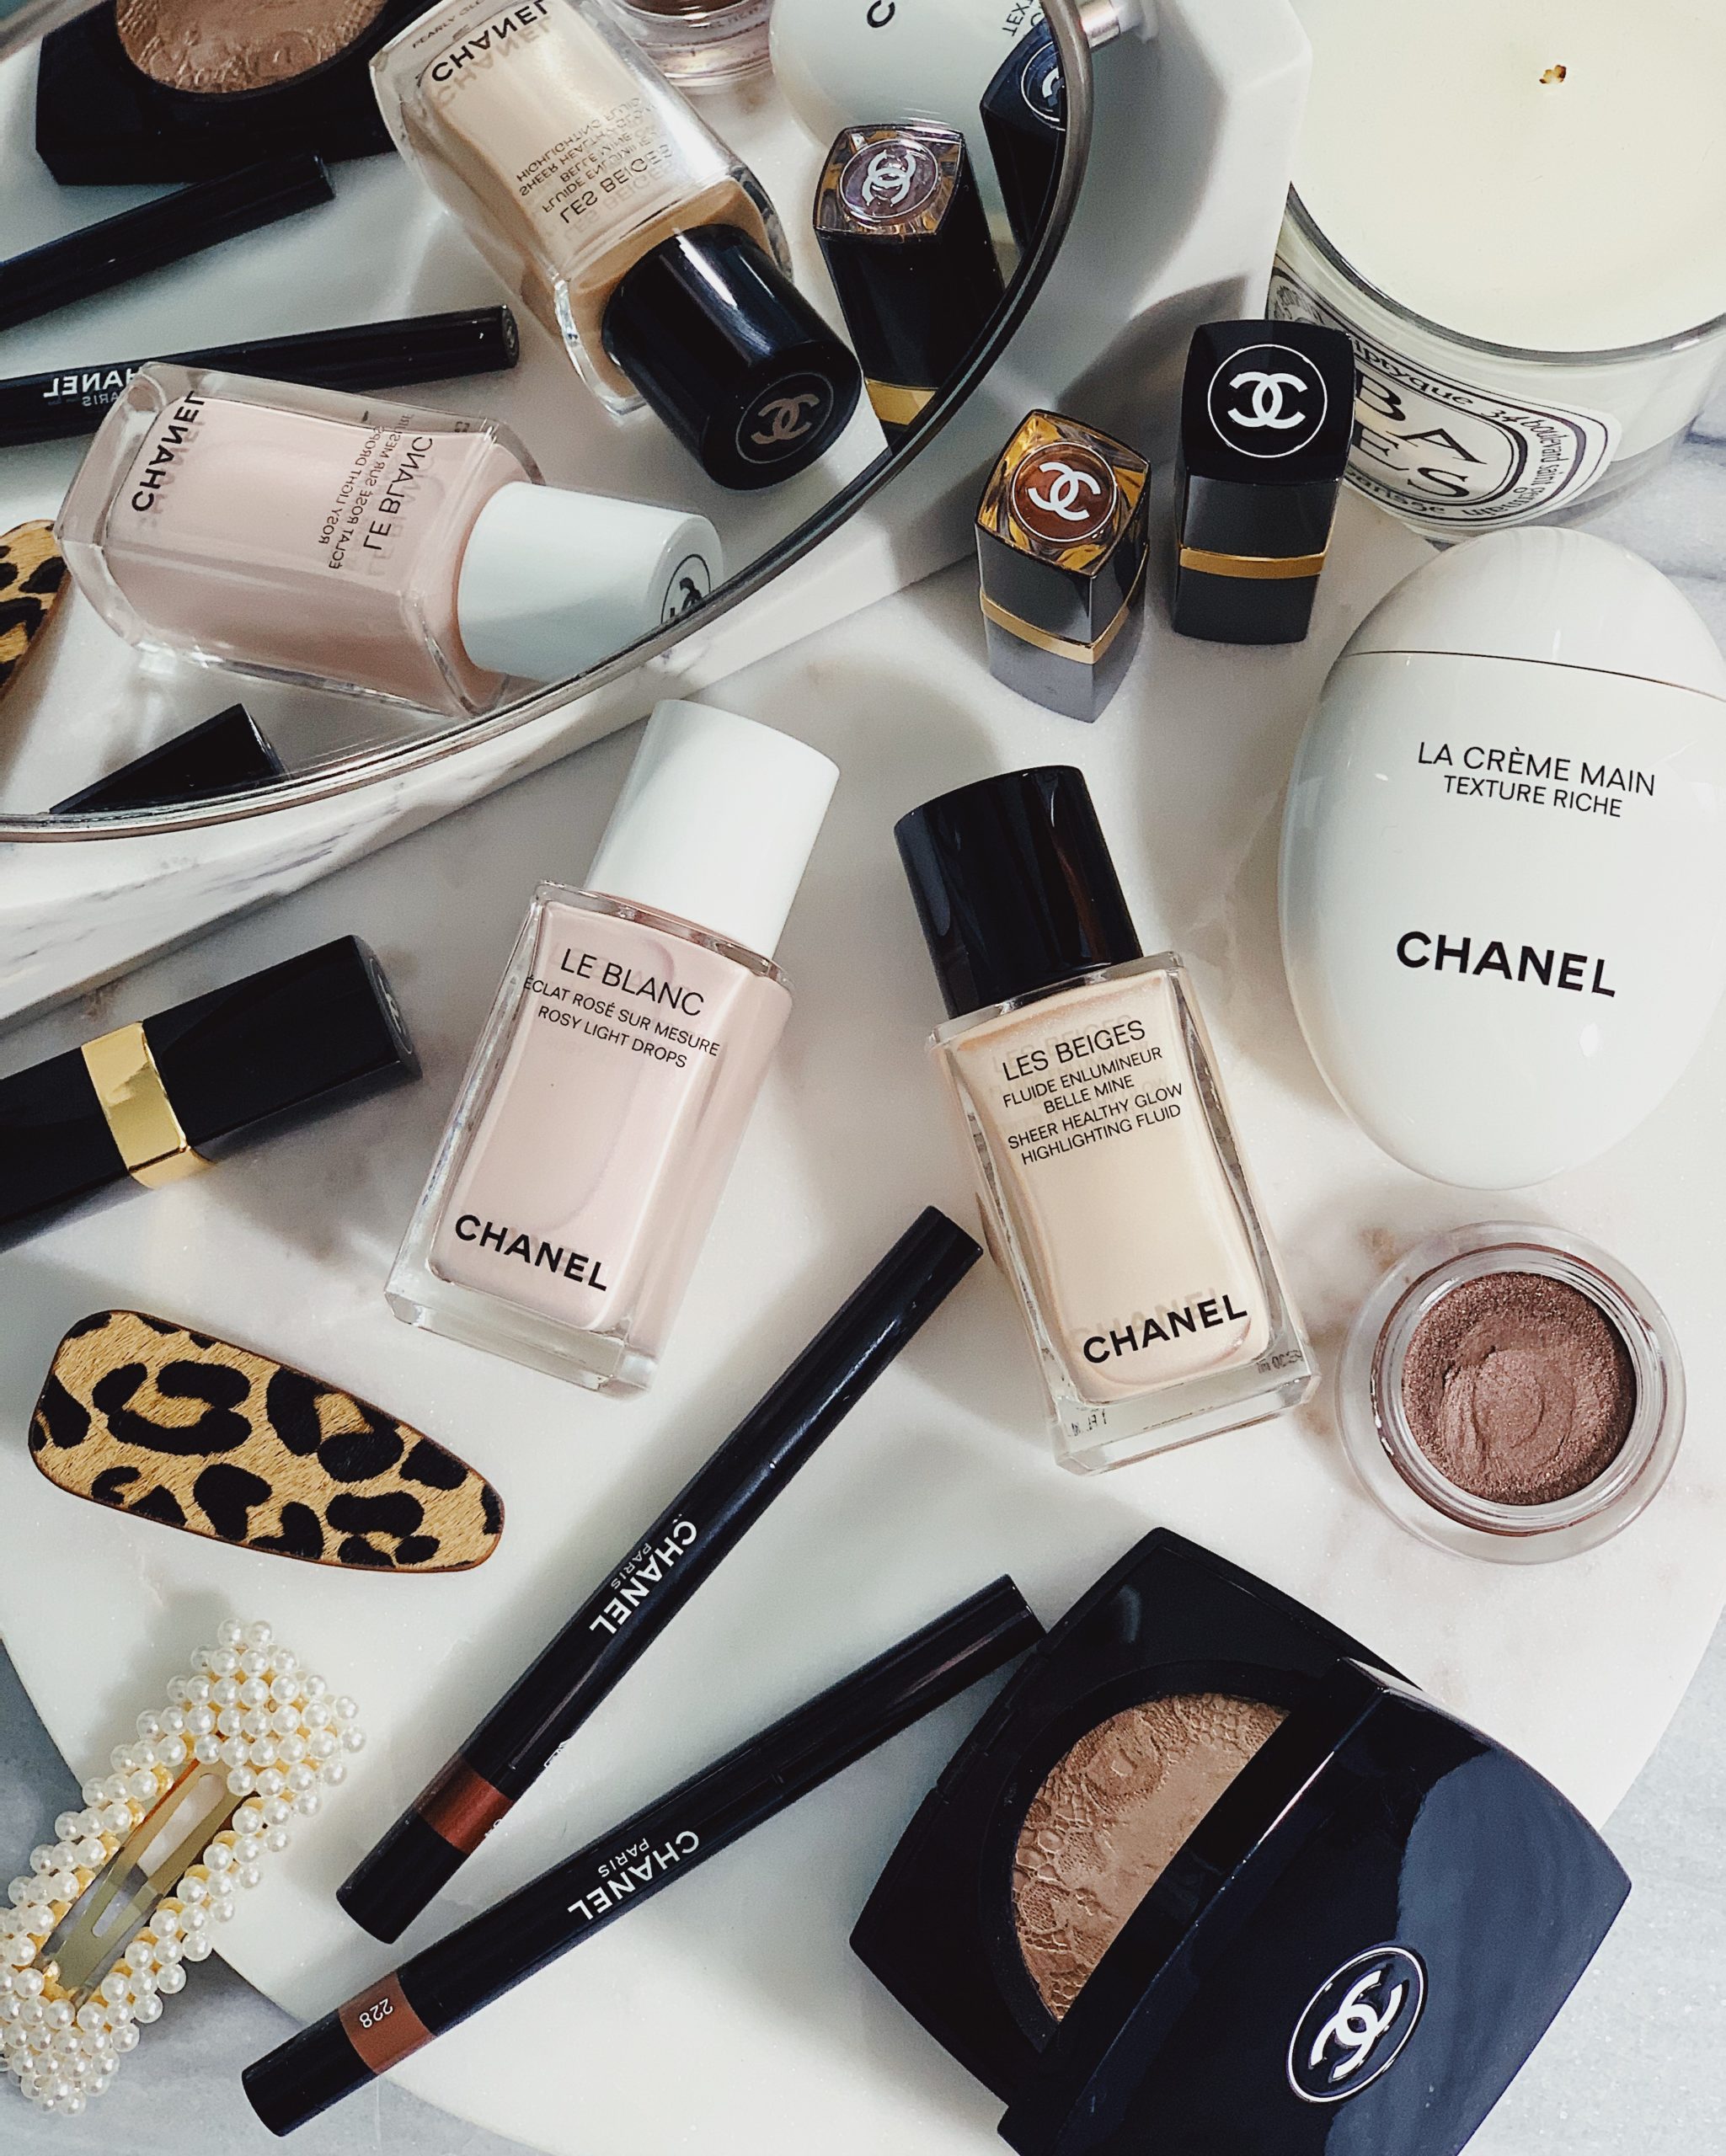 CHANEL Le Blanc Rosy Light Drops & Les Beiges Pearly Glow · the beauty  endeavor